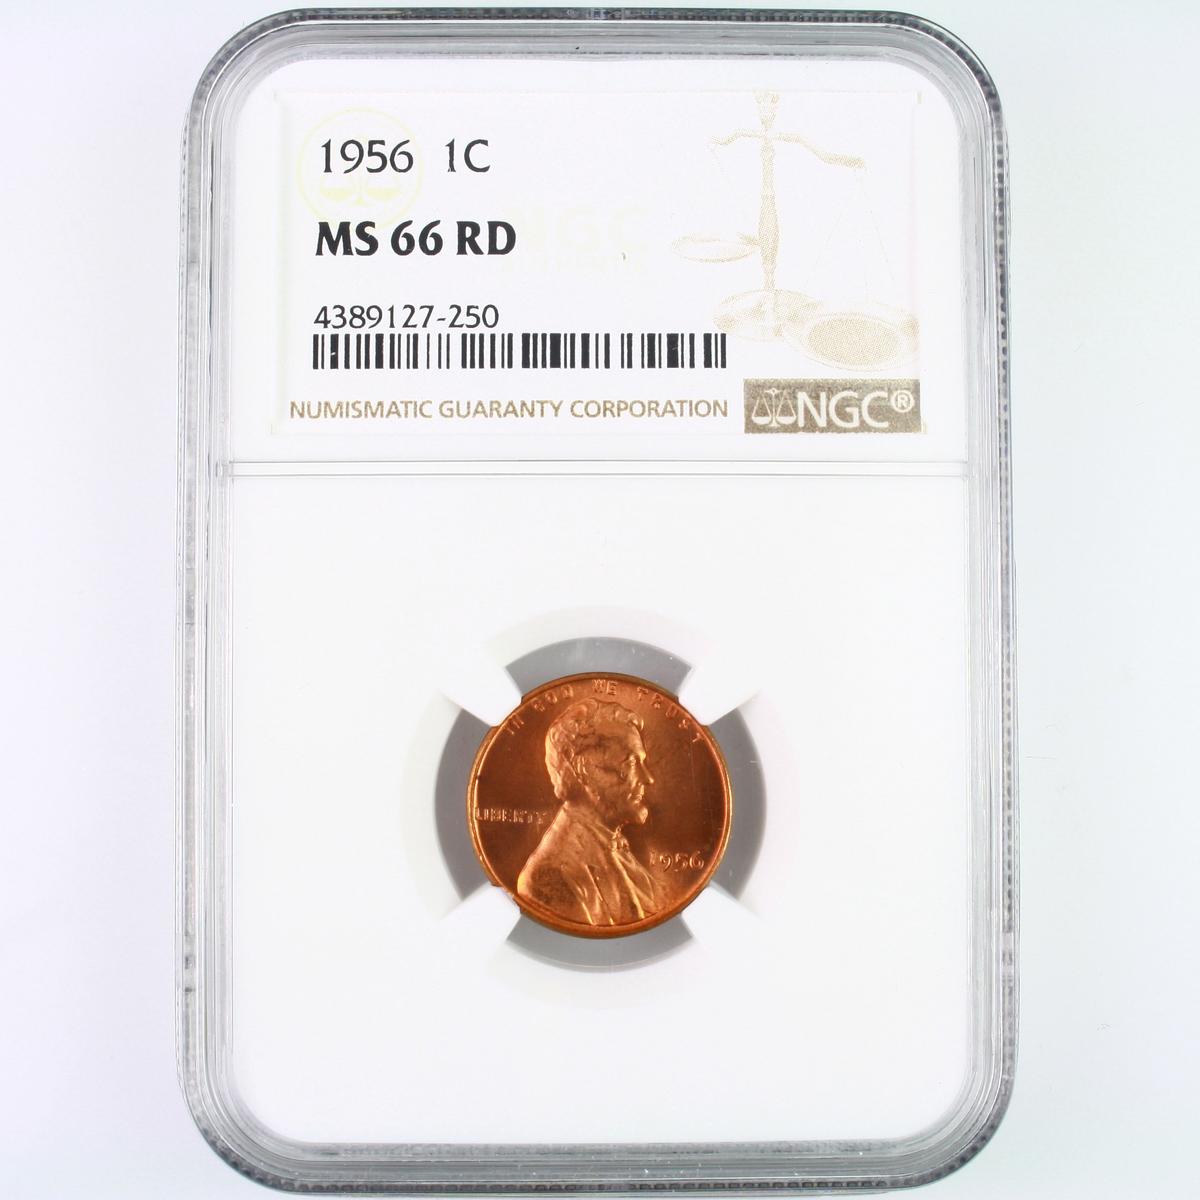 Certified 1956 U.S. Lincoln cent